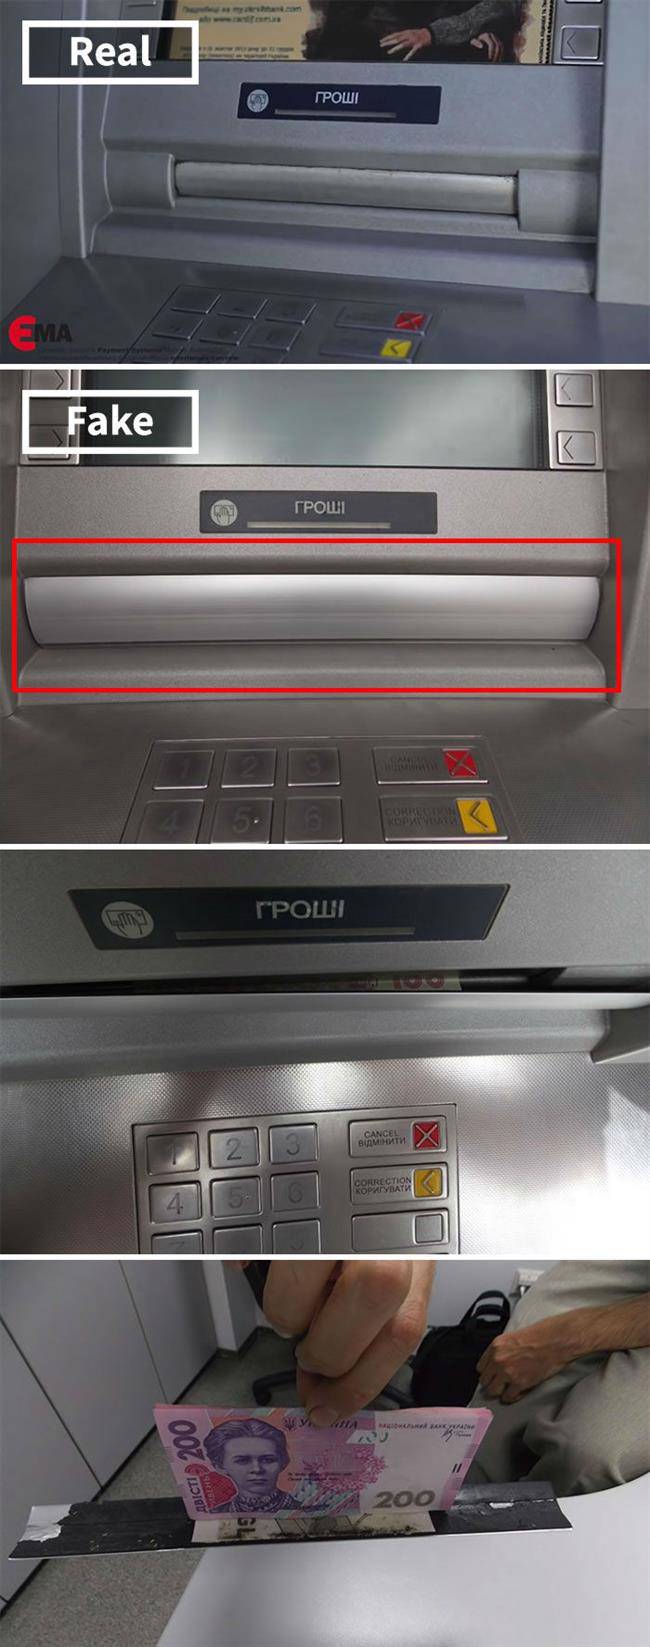 how-to-spot-atm-scam-8-594cd78fc3a4d__700-w750